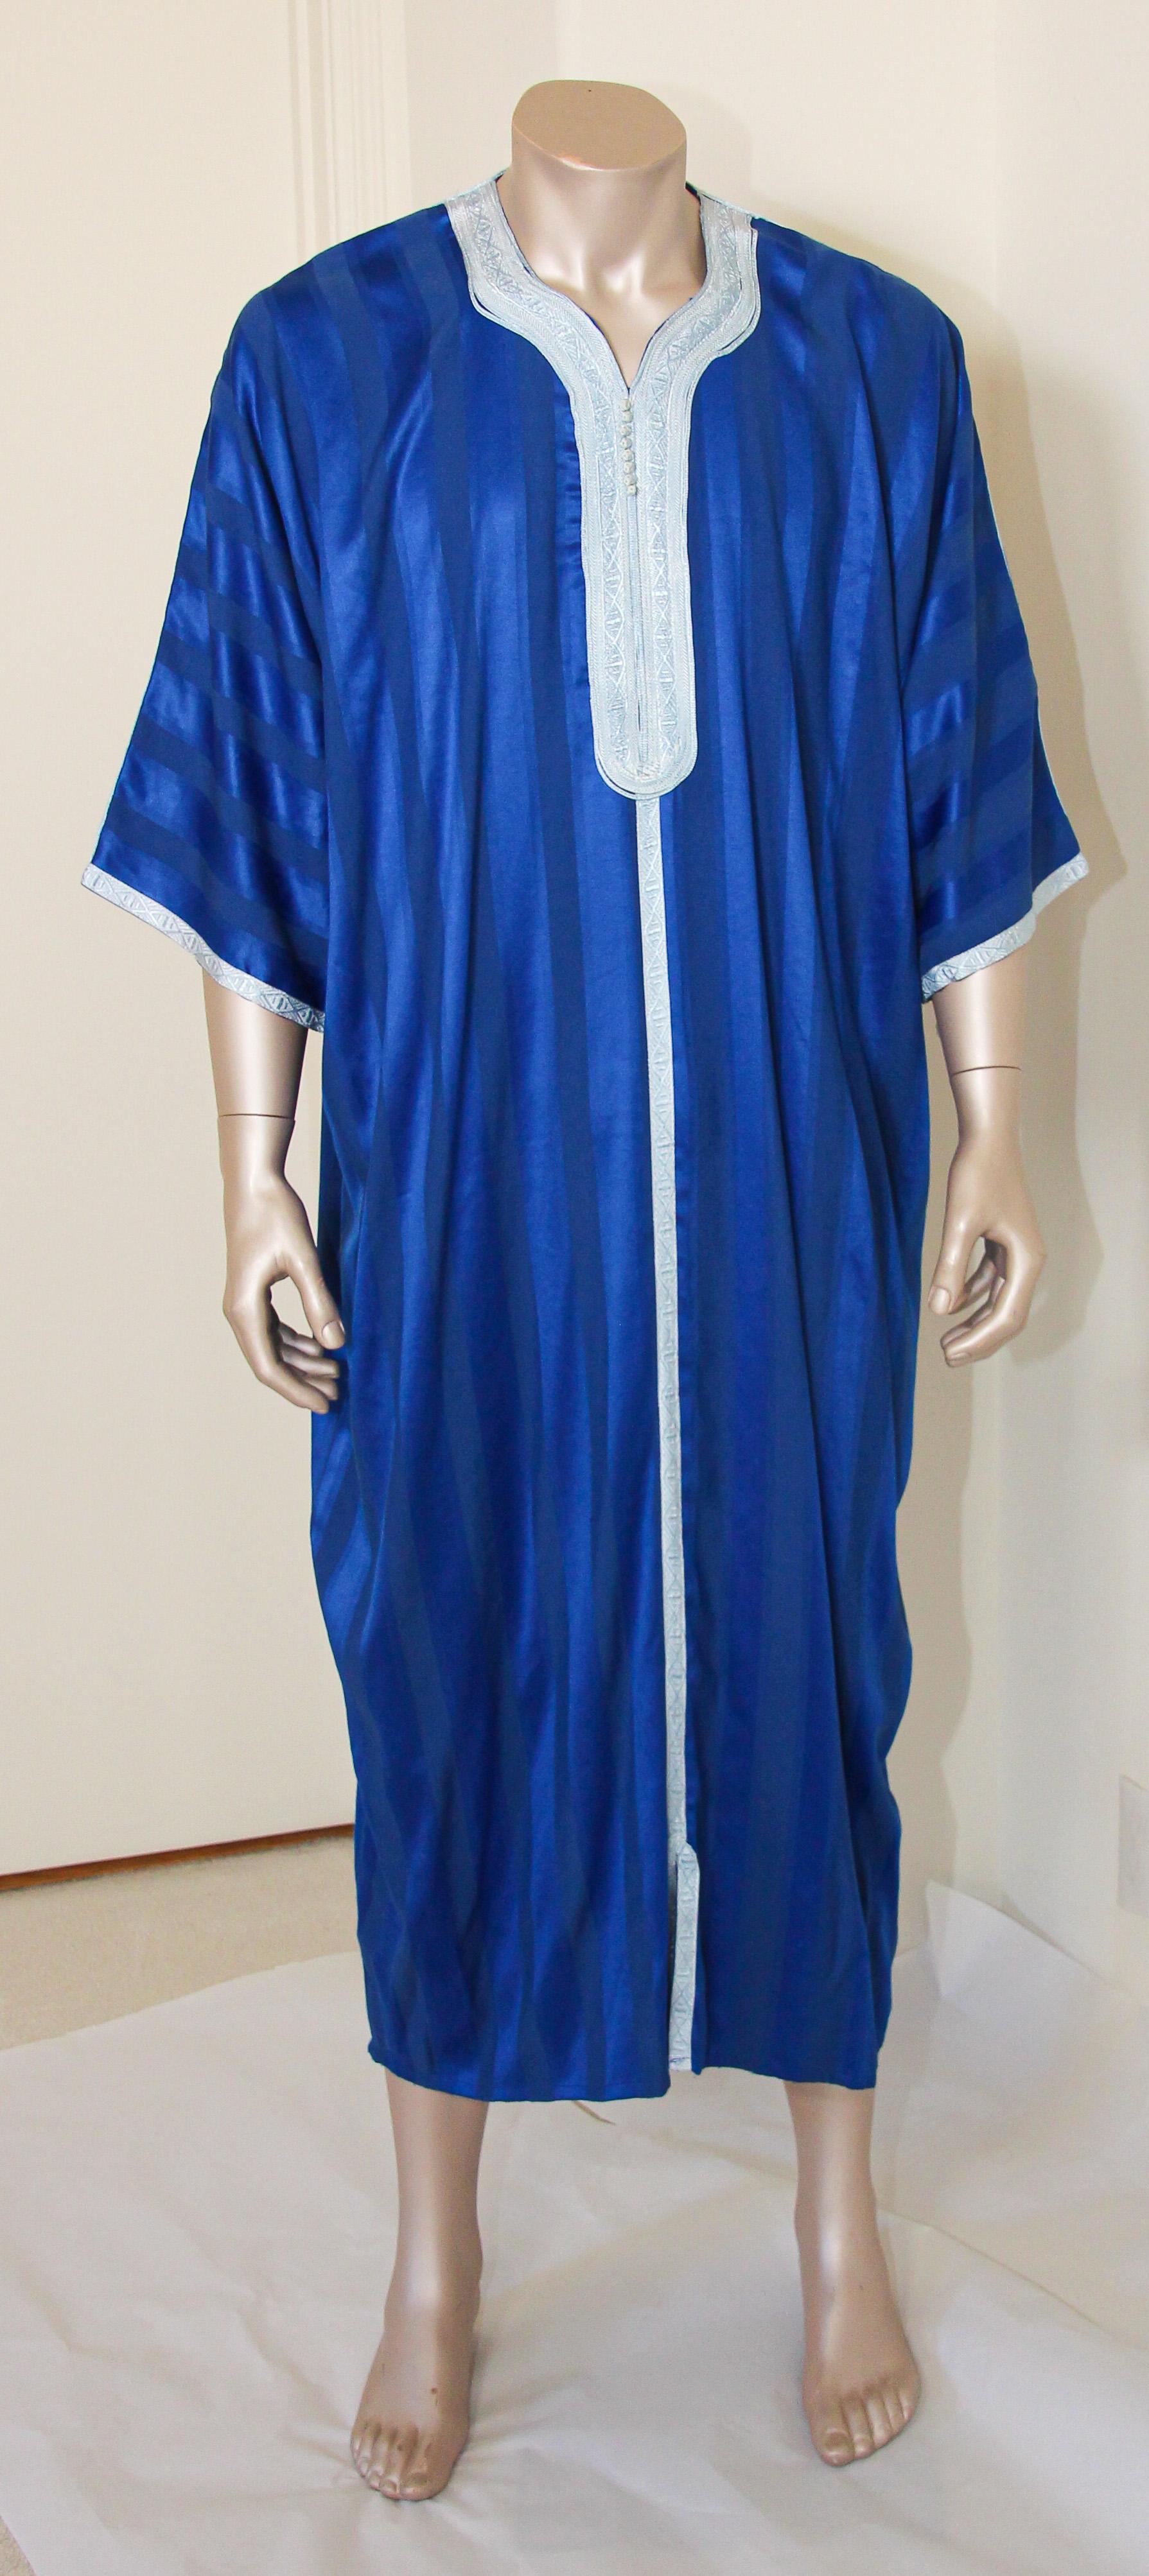 Moroccan gentleman vintage cobalt blue caftan embellished with embroidered trim.
In Morocco, fashion preserves its traditional style inherited from great civilizations that found their way to Northwest Africa, such as the Ottomans and the